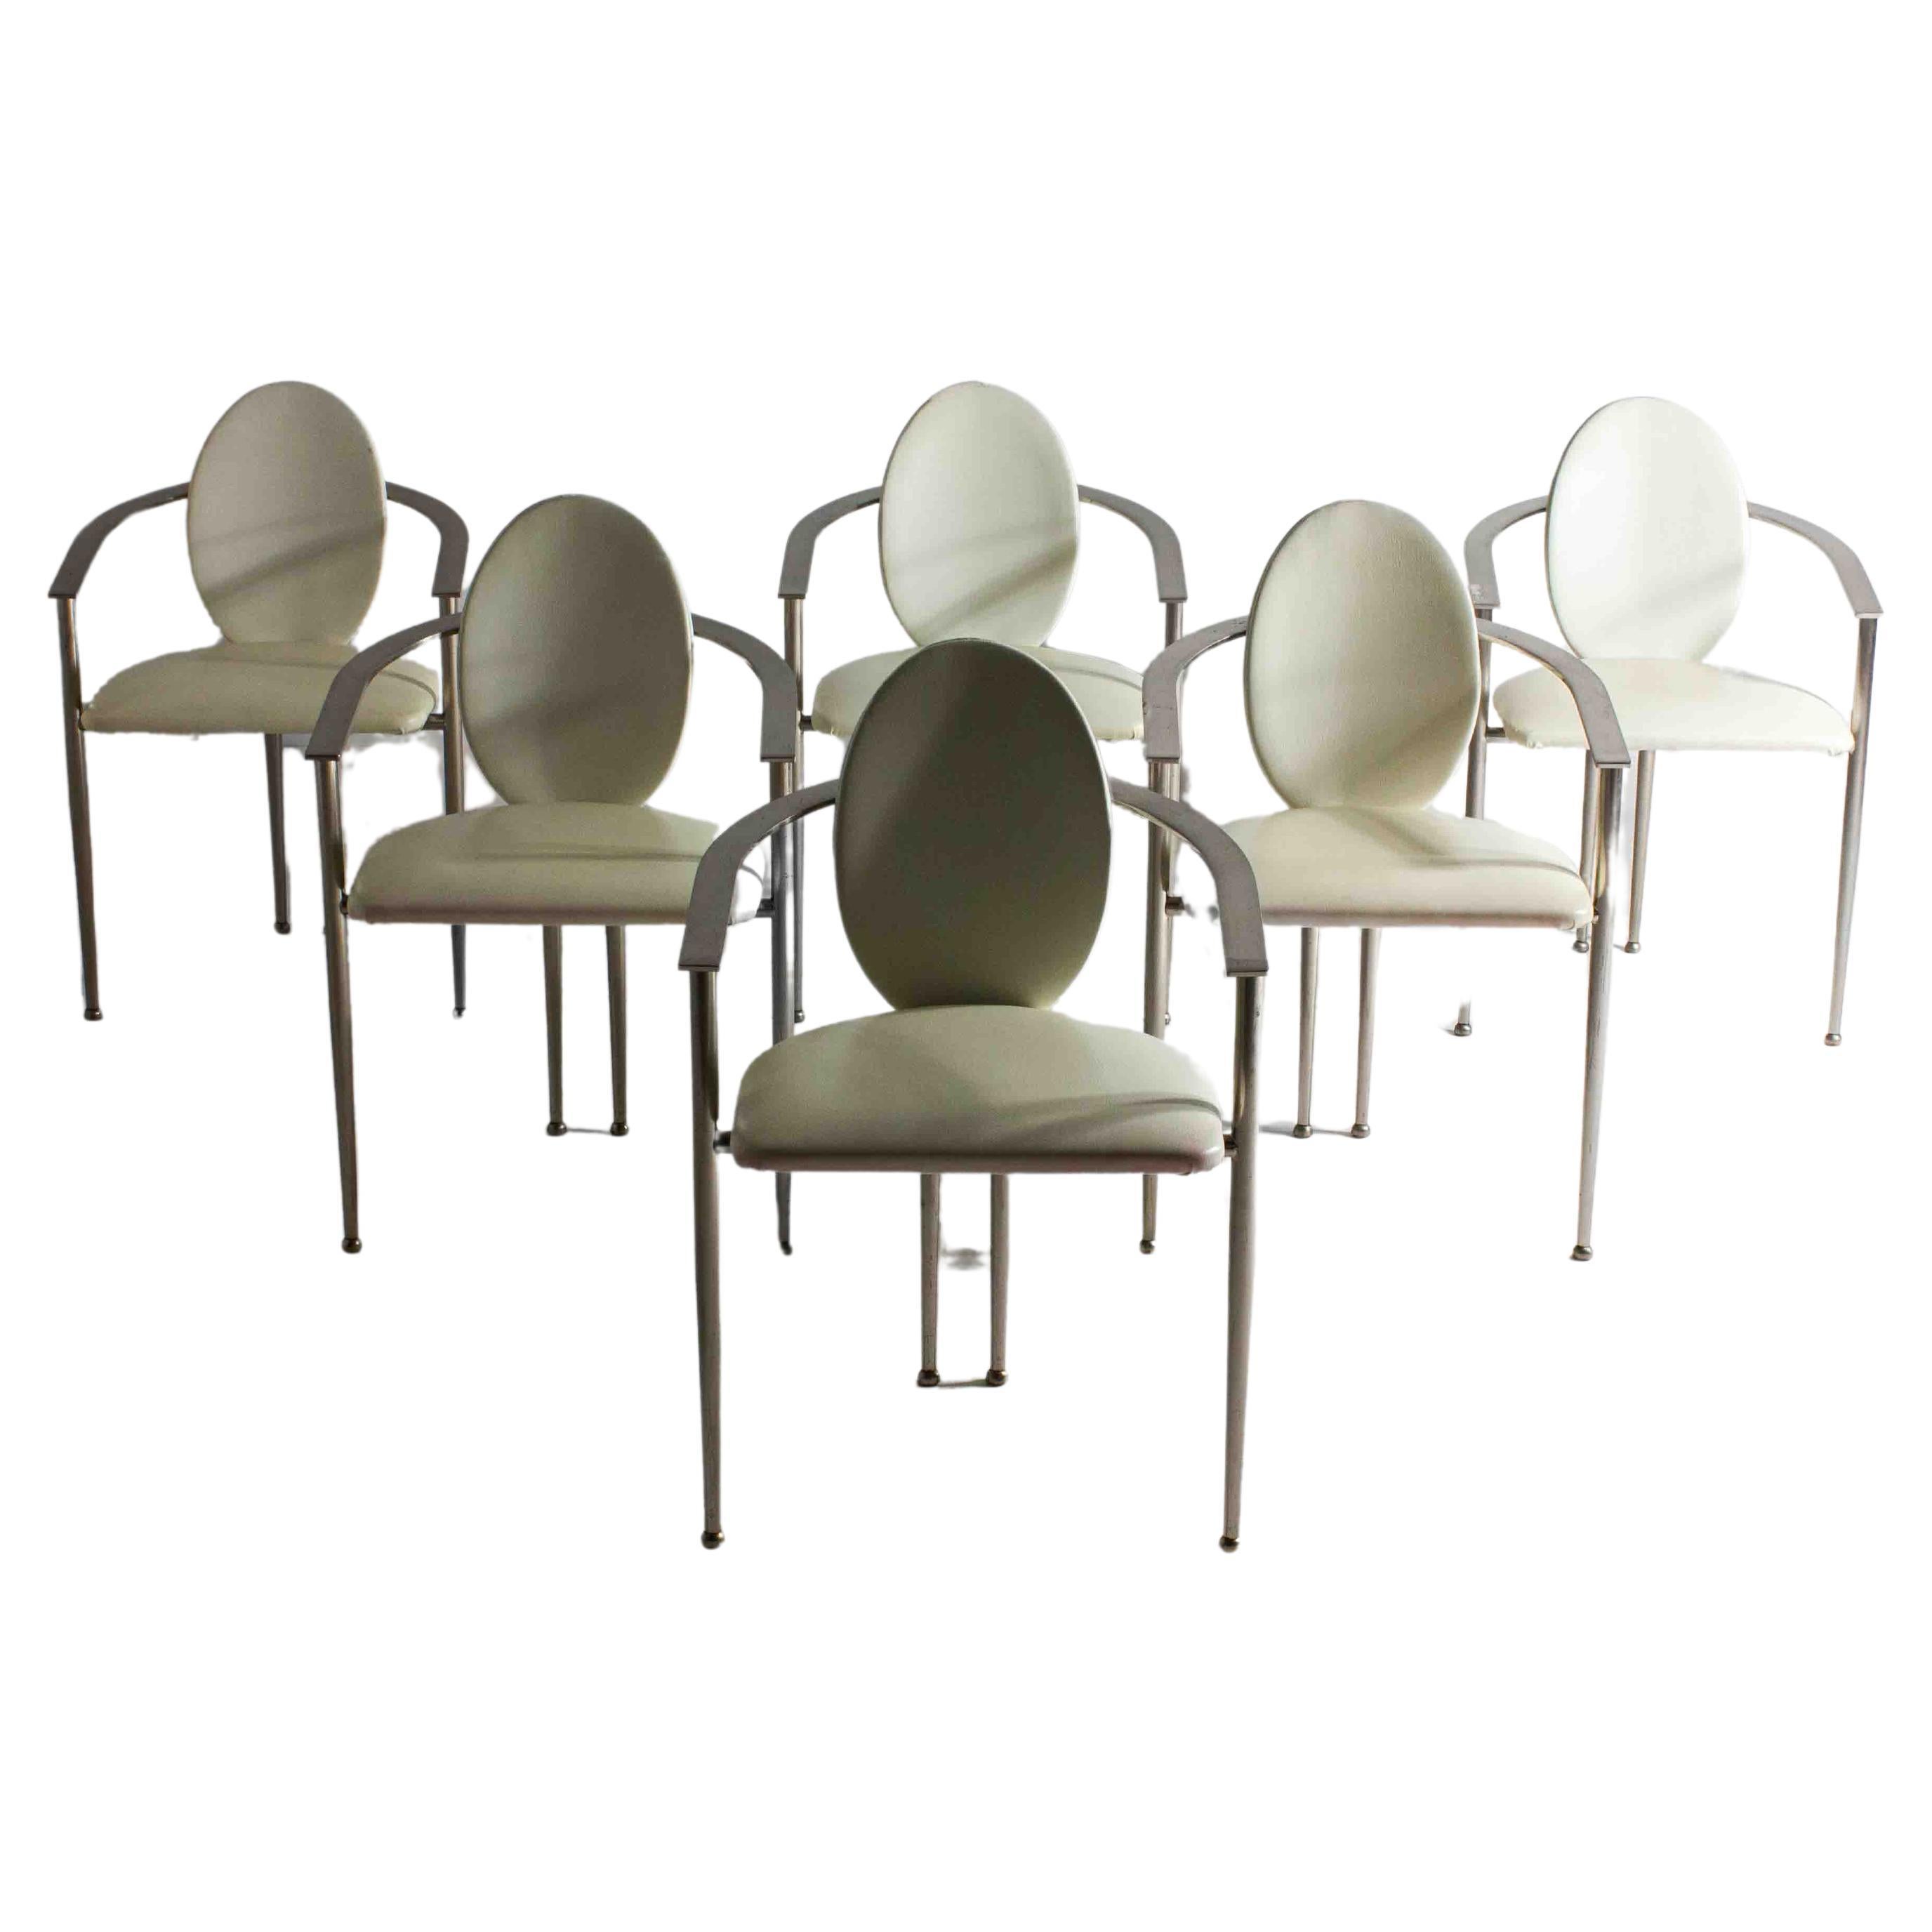 Postmodern dining chairs in steel and white leather, Belgium 1980s